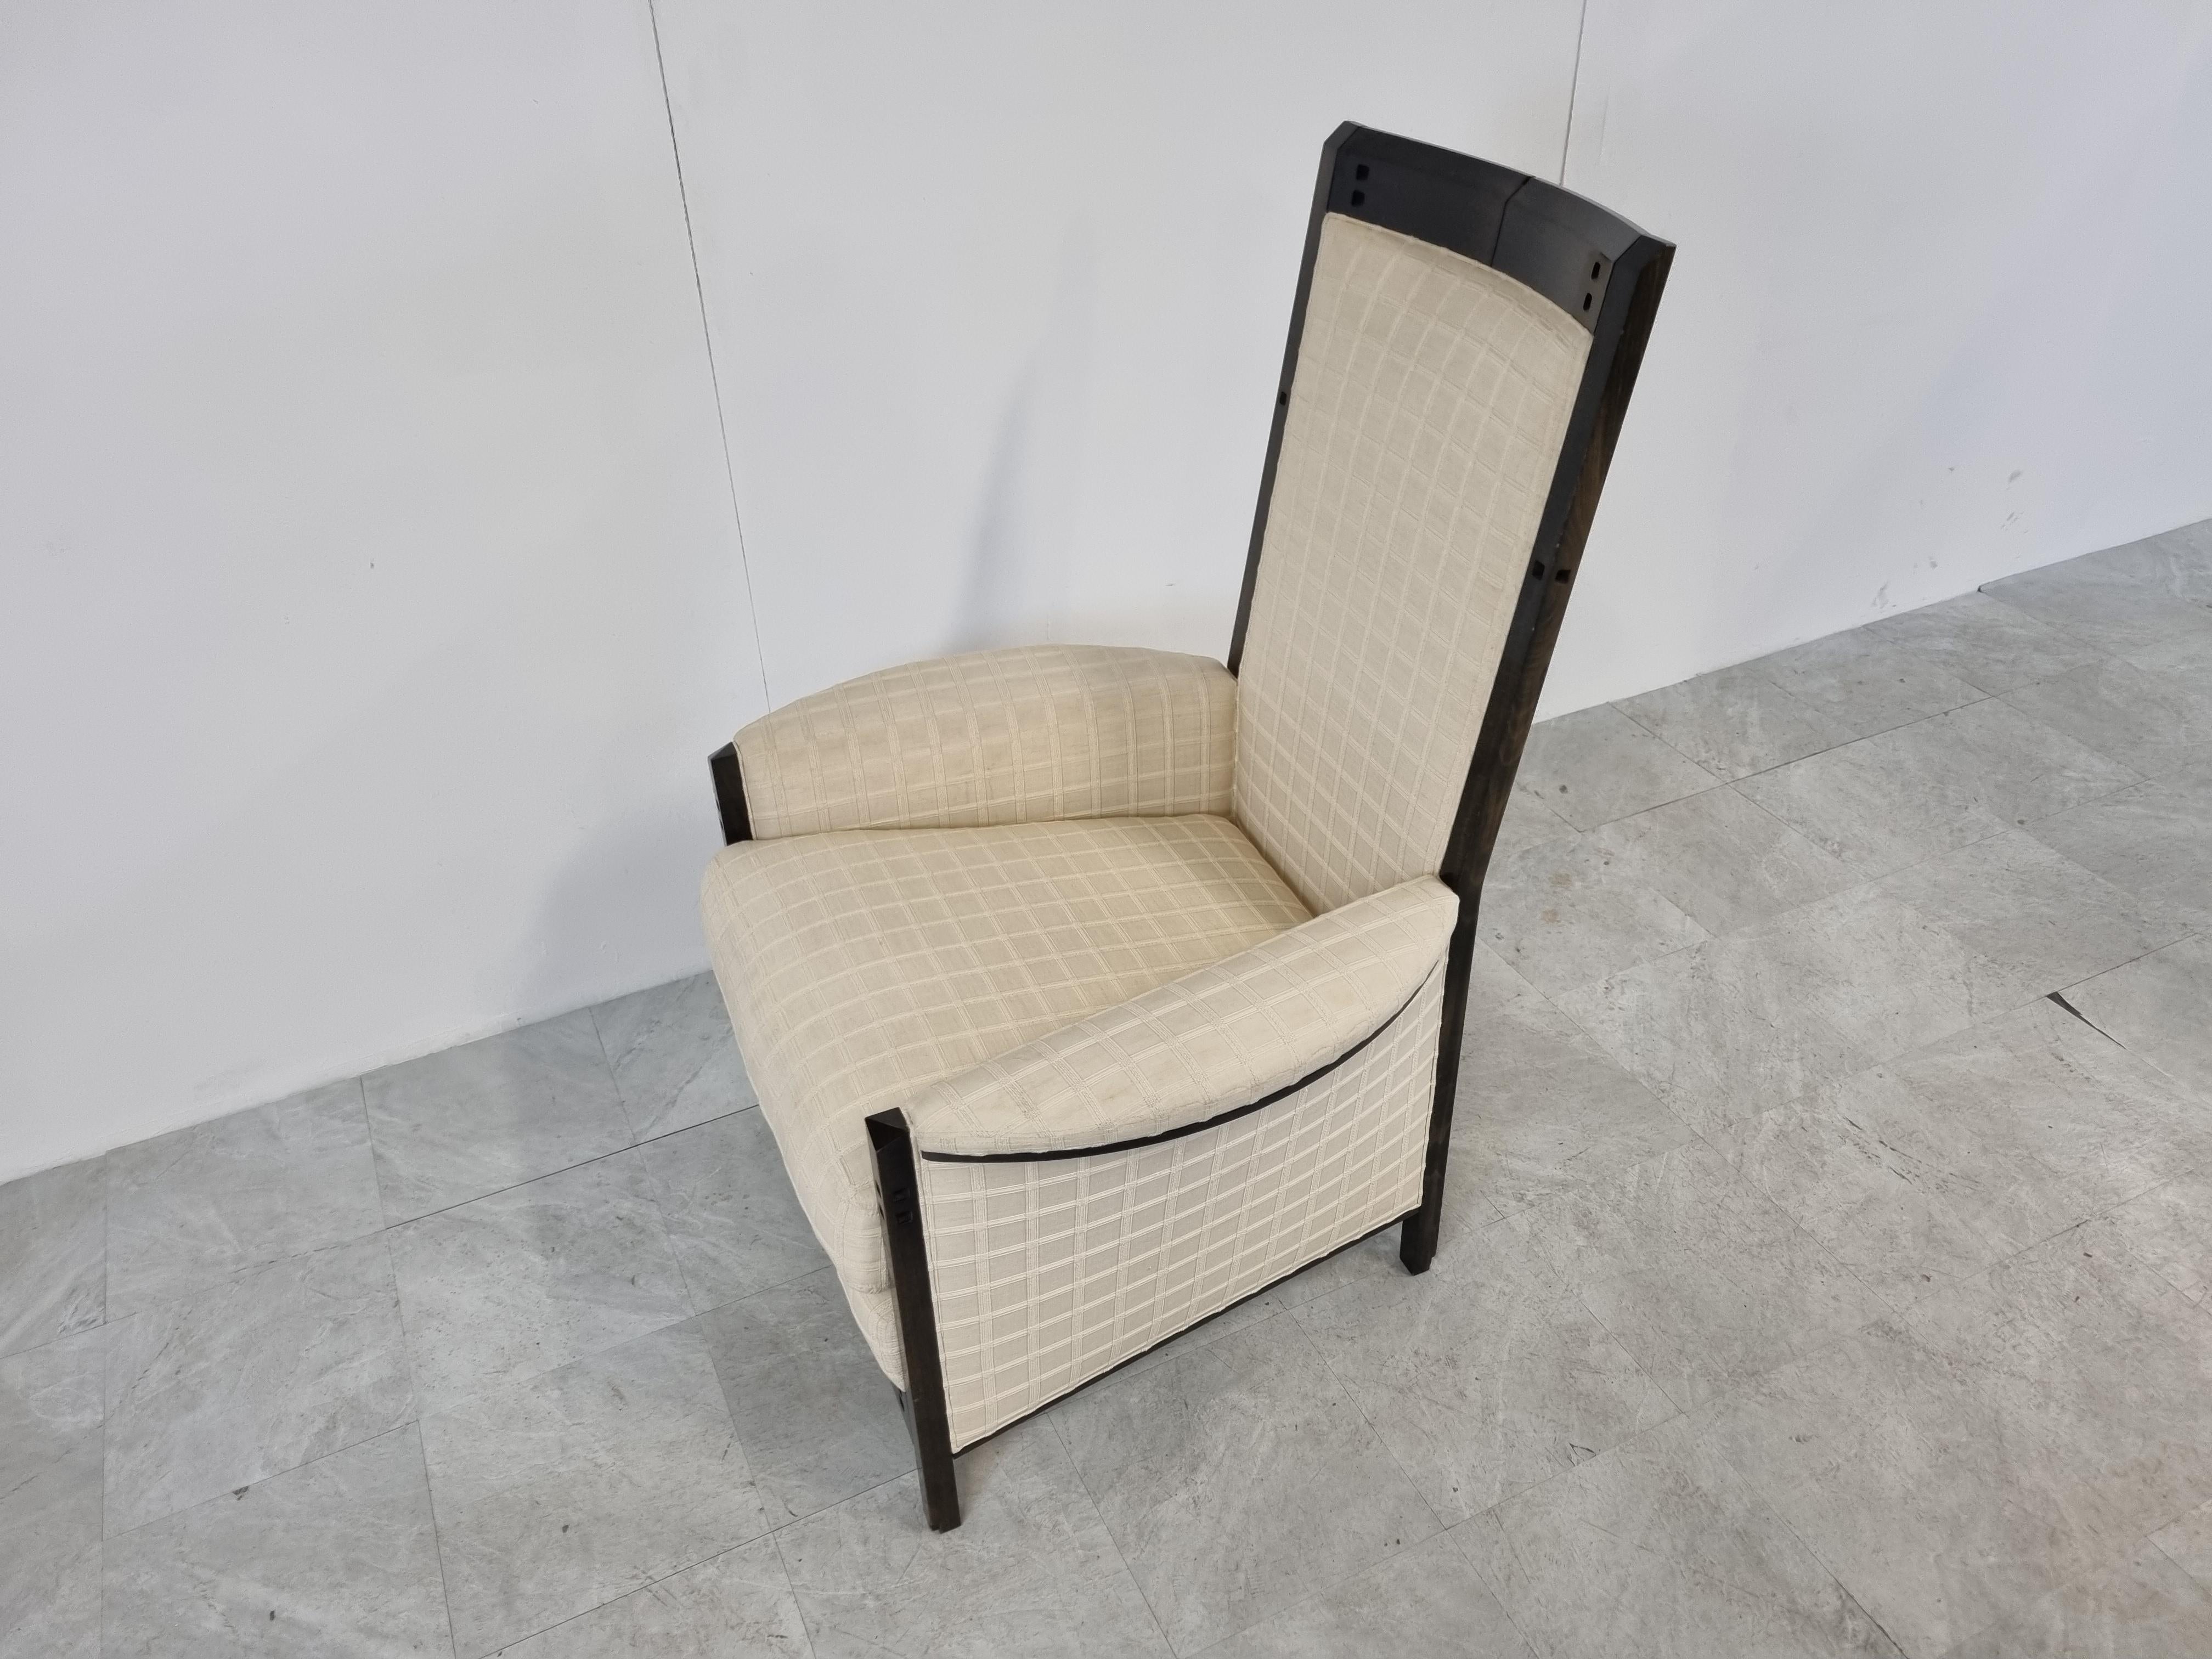 Rare Umberto Asnago high back armchair for renowned italian furniture maker 'Giorgetti'

Model 'Peggy' for the Galaxy series.

Use of fine wood with beige square motive fabric.

Original upholstery, no damages only user traces.

Timeless